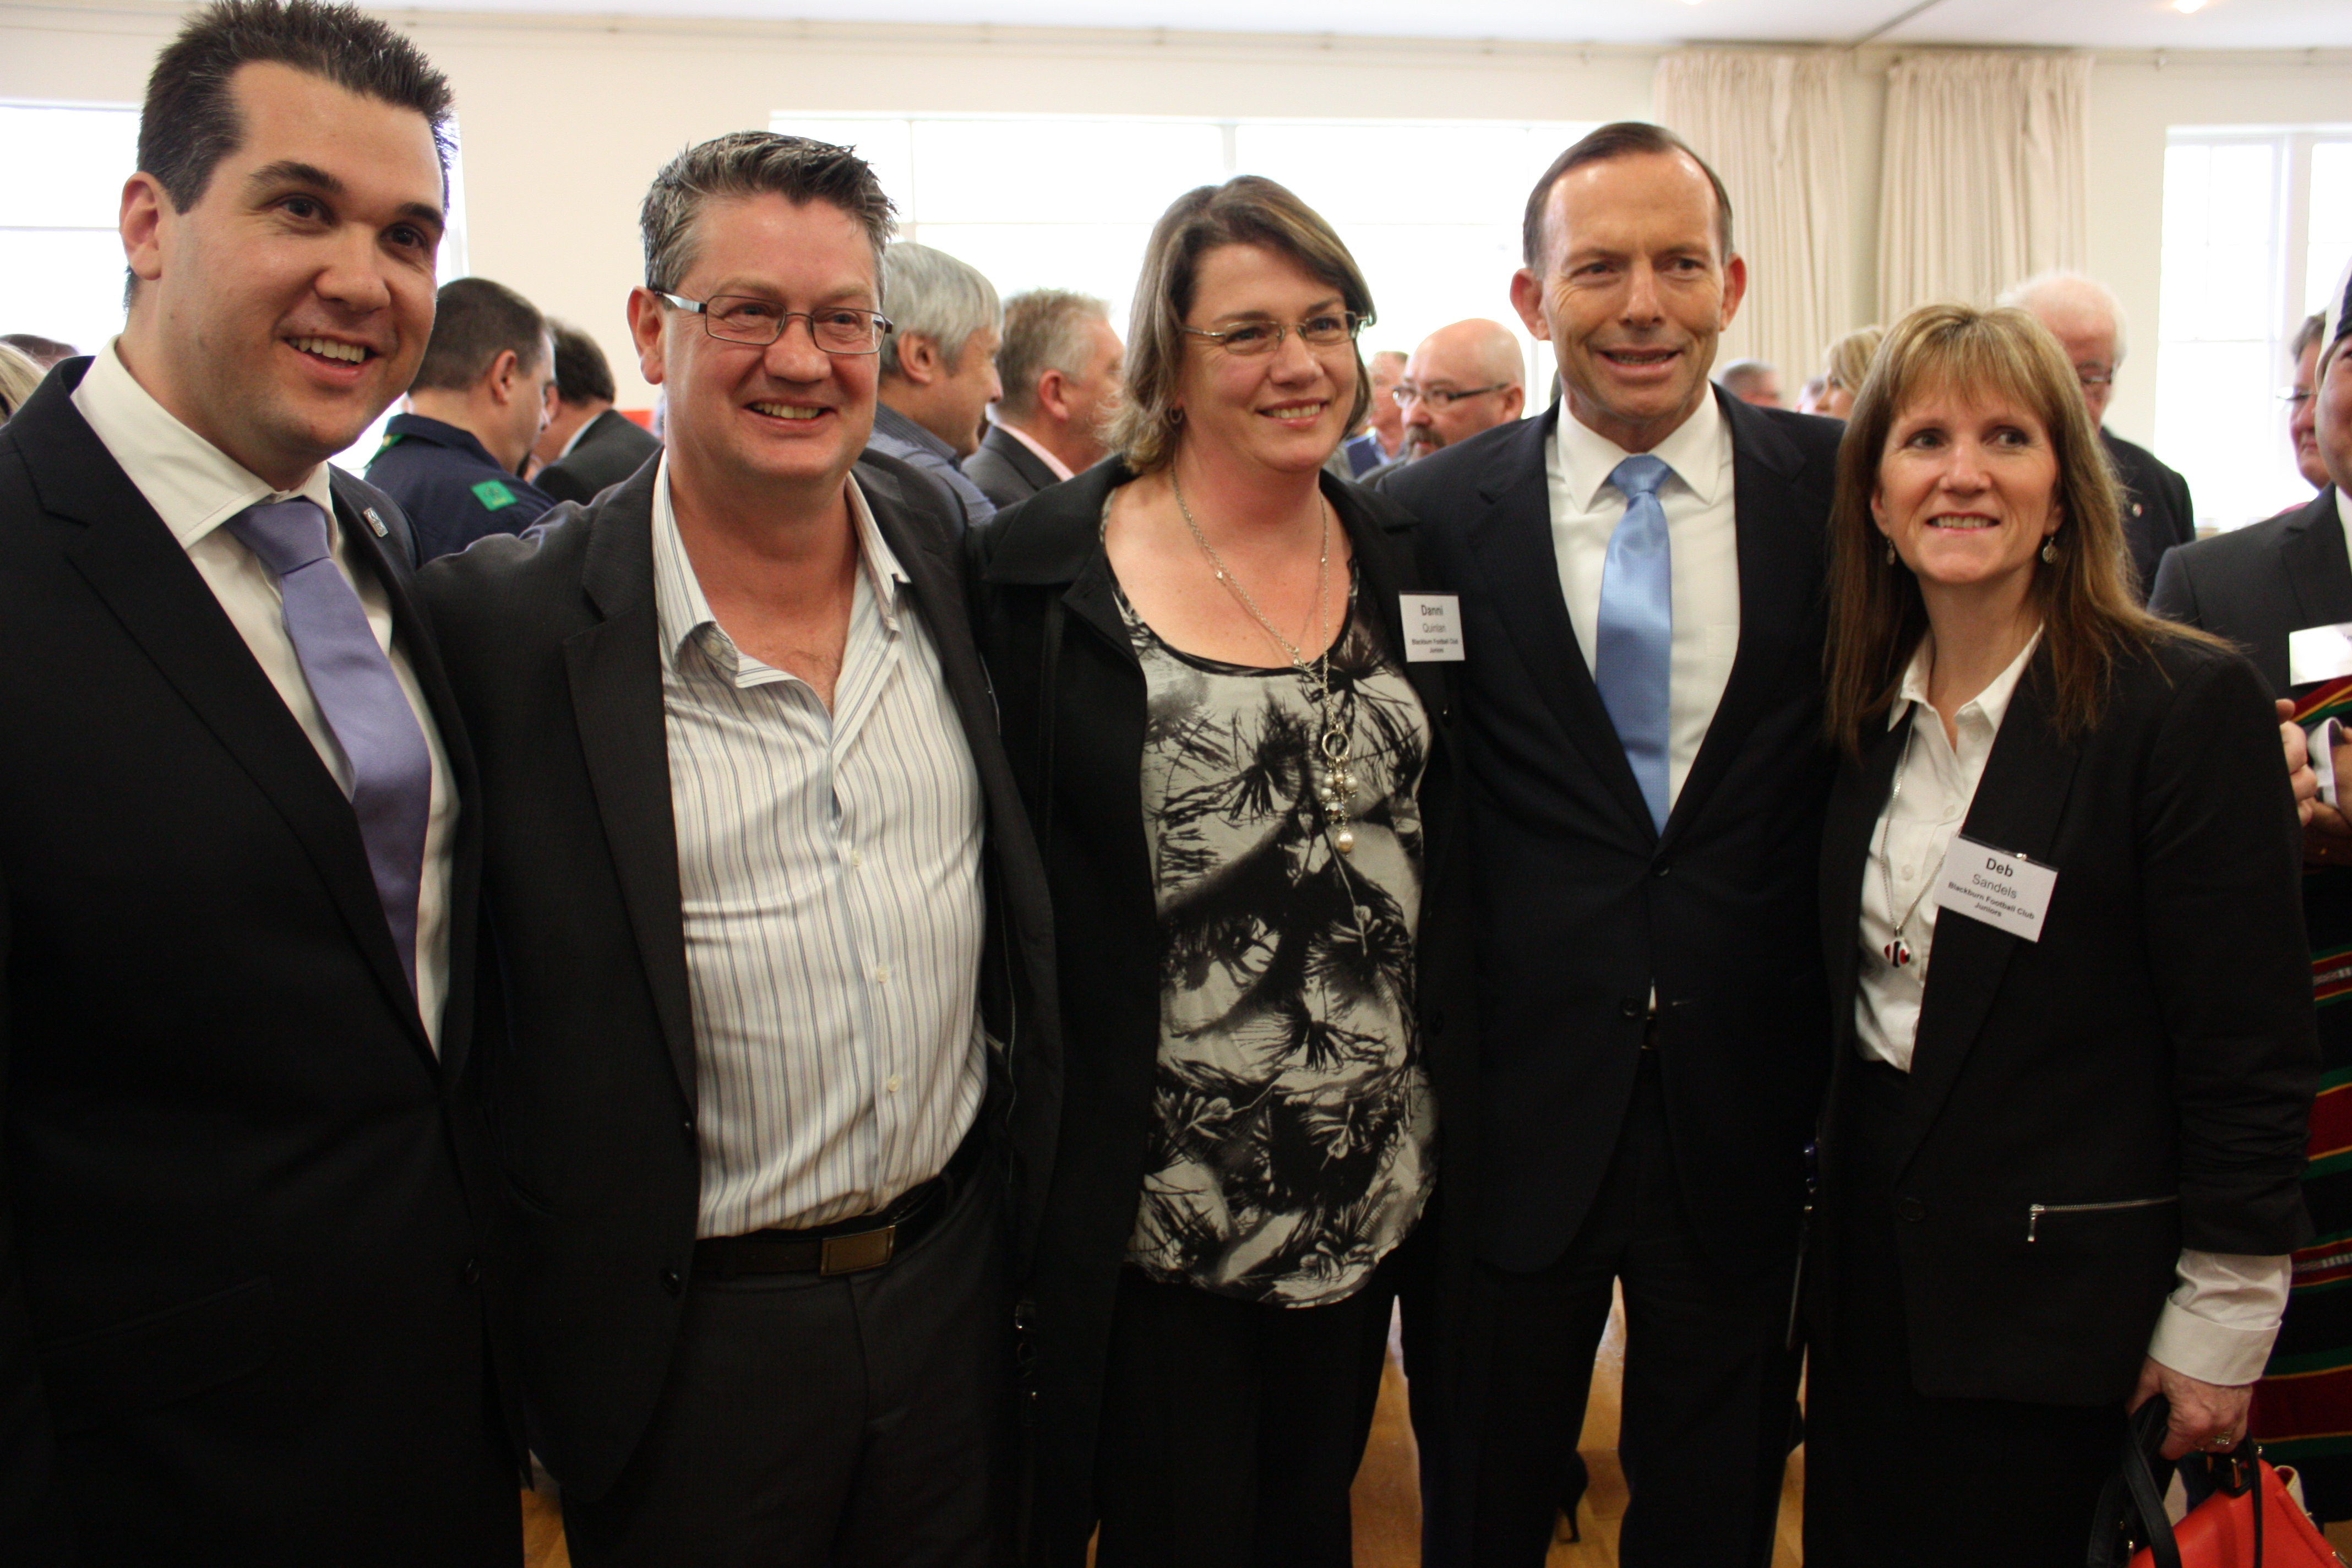 Deakin Community Morning Tea with PM